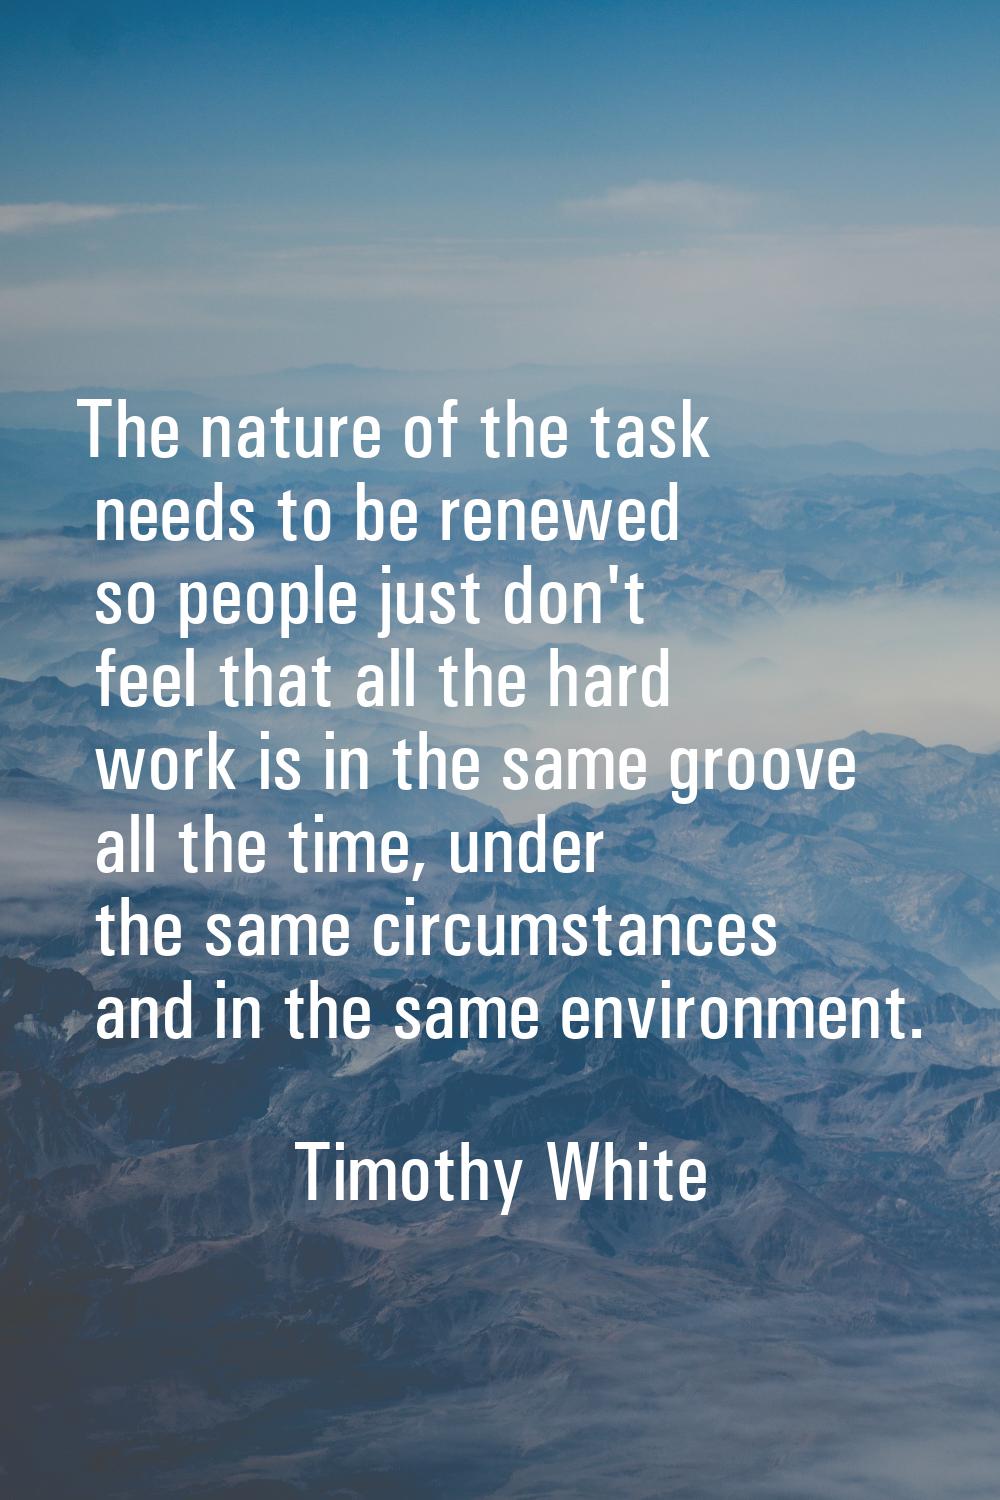 The nature of the task needs to be renewed so people just don't feel that all the hard work is in t